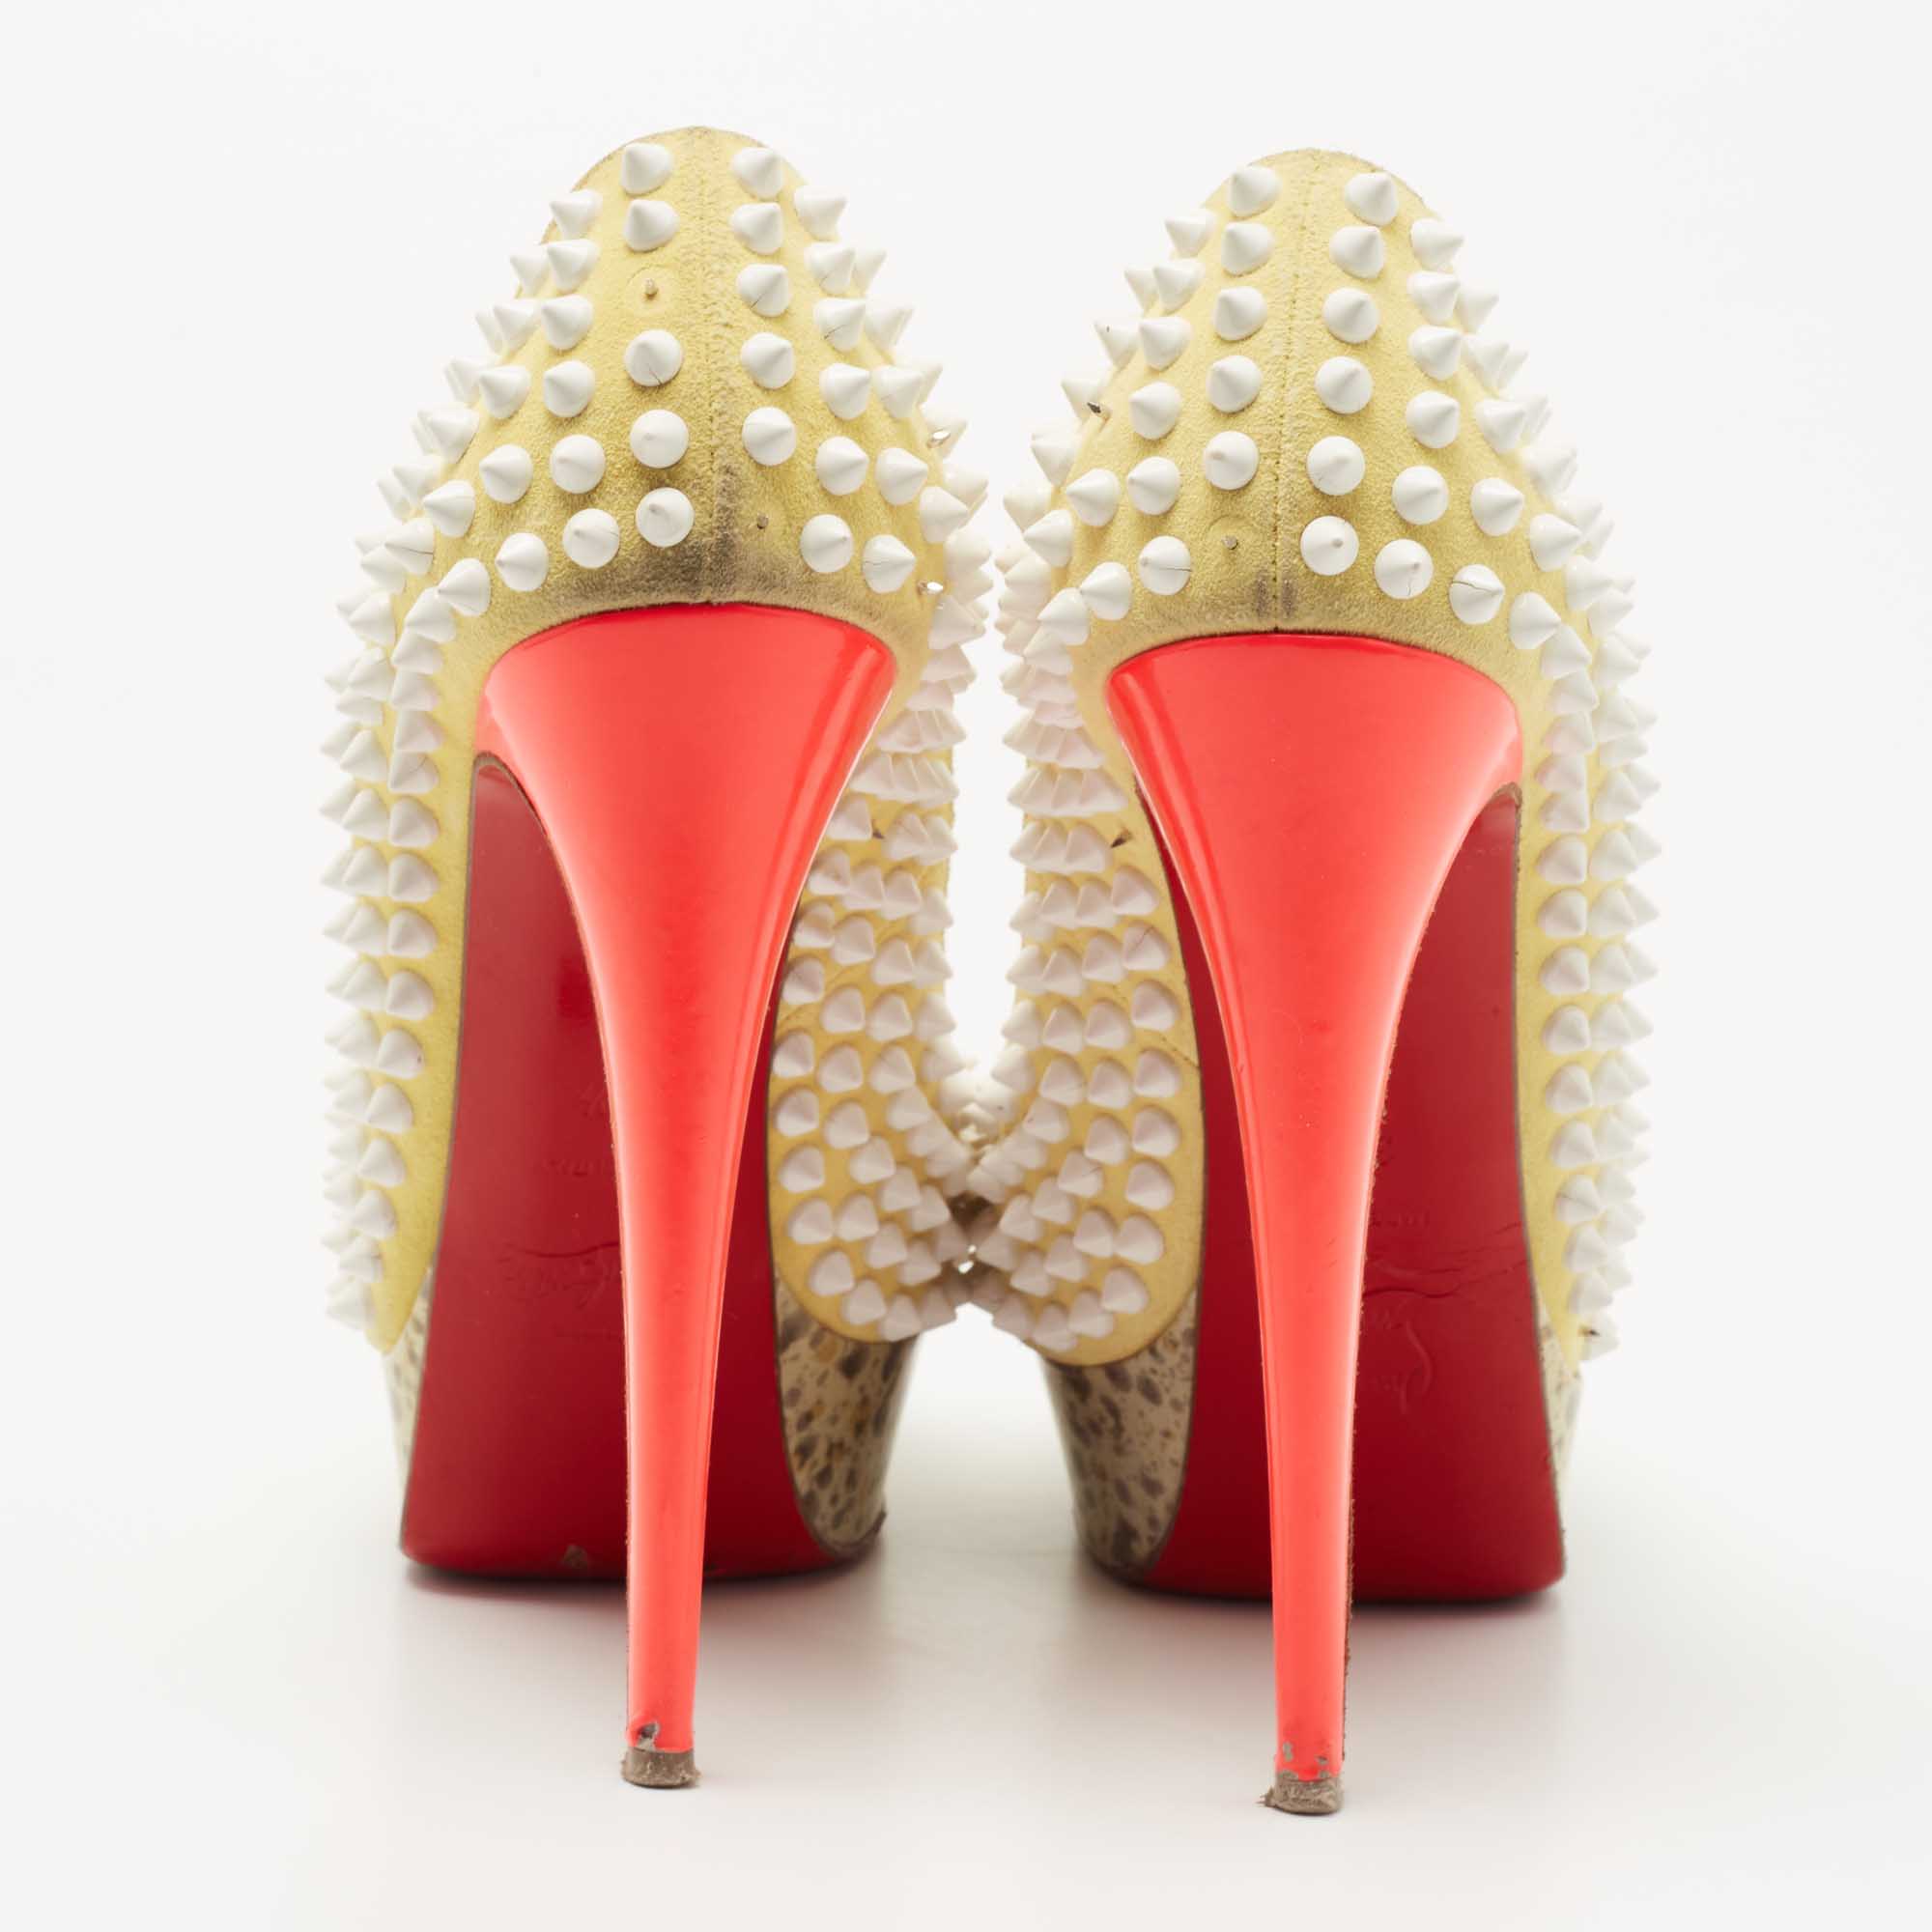 Christian Louboutin Yellow Suede Lady Peep Spikes Pumps Size 37.5